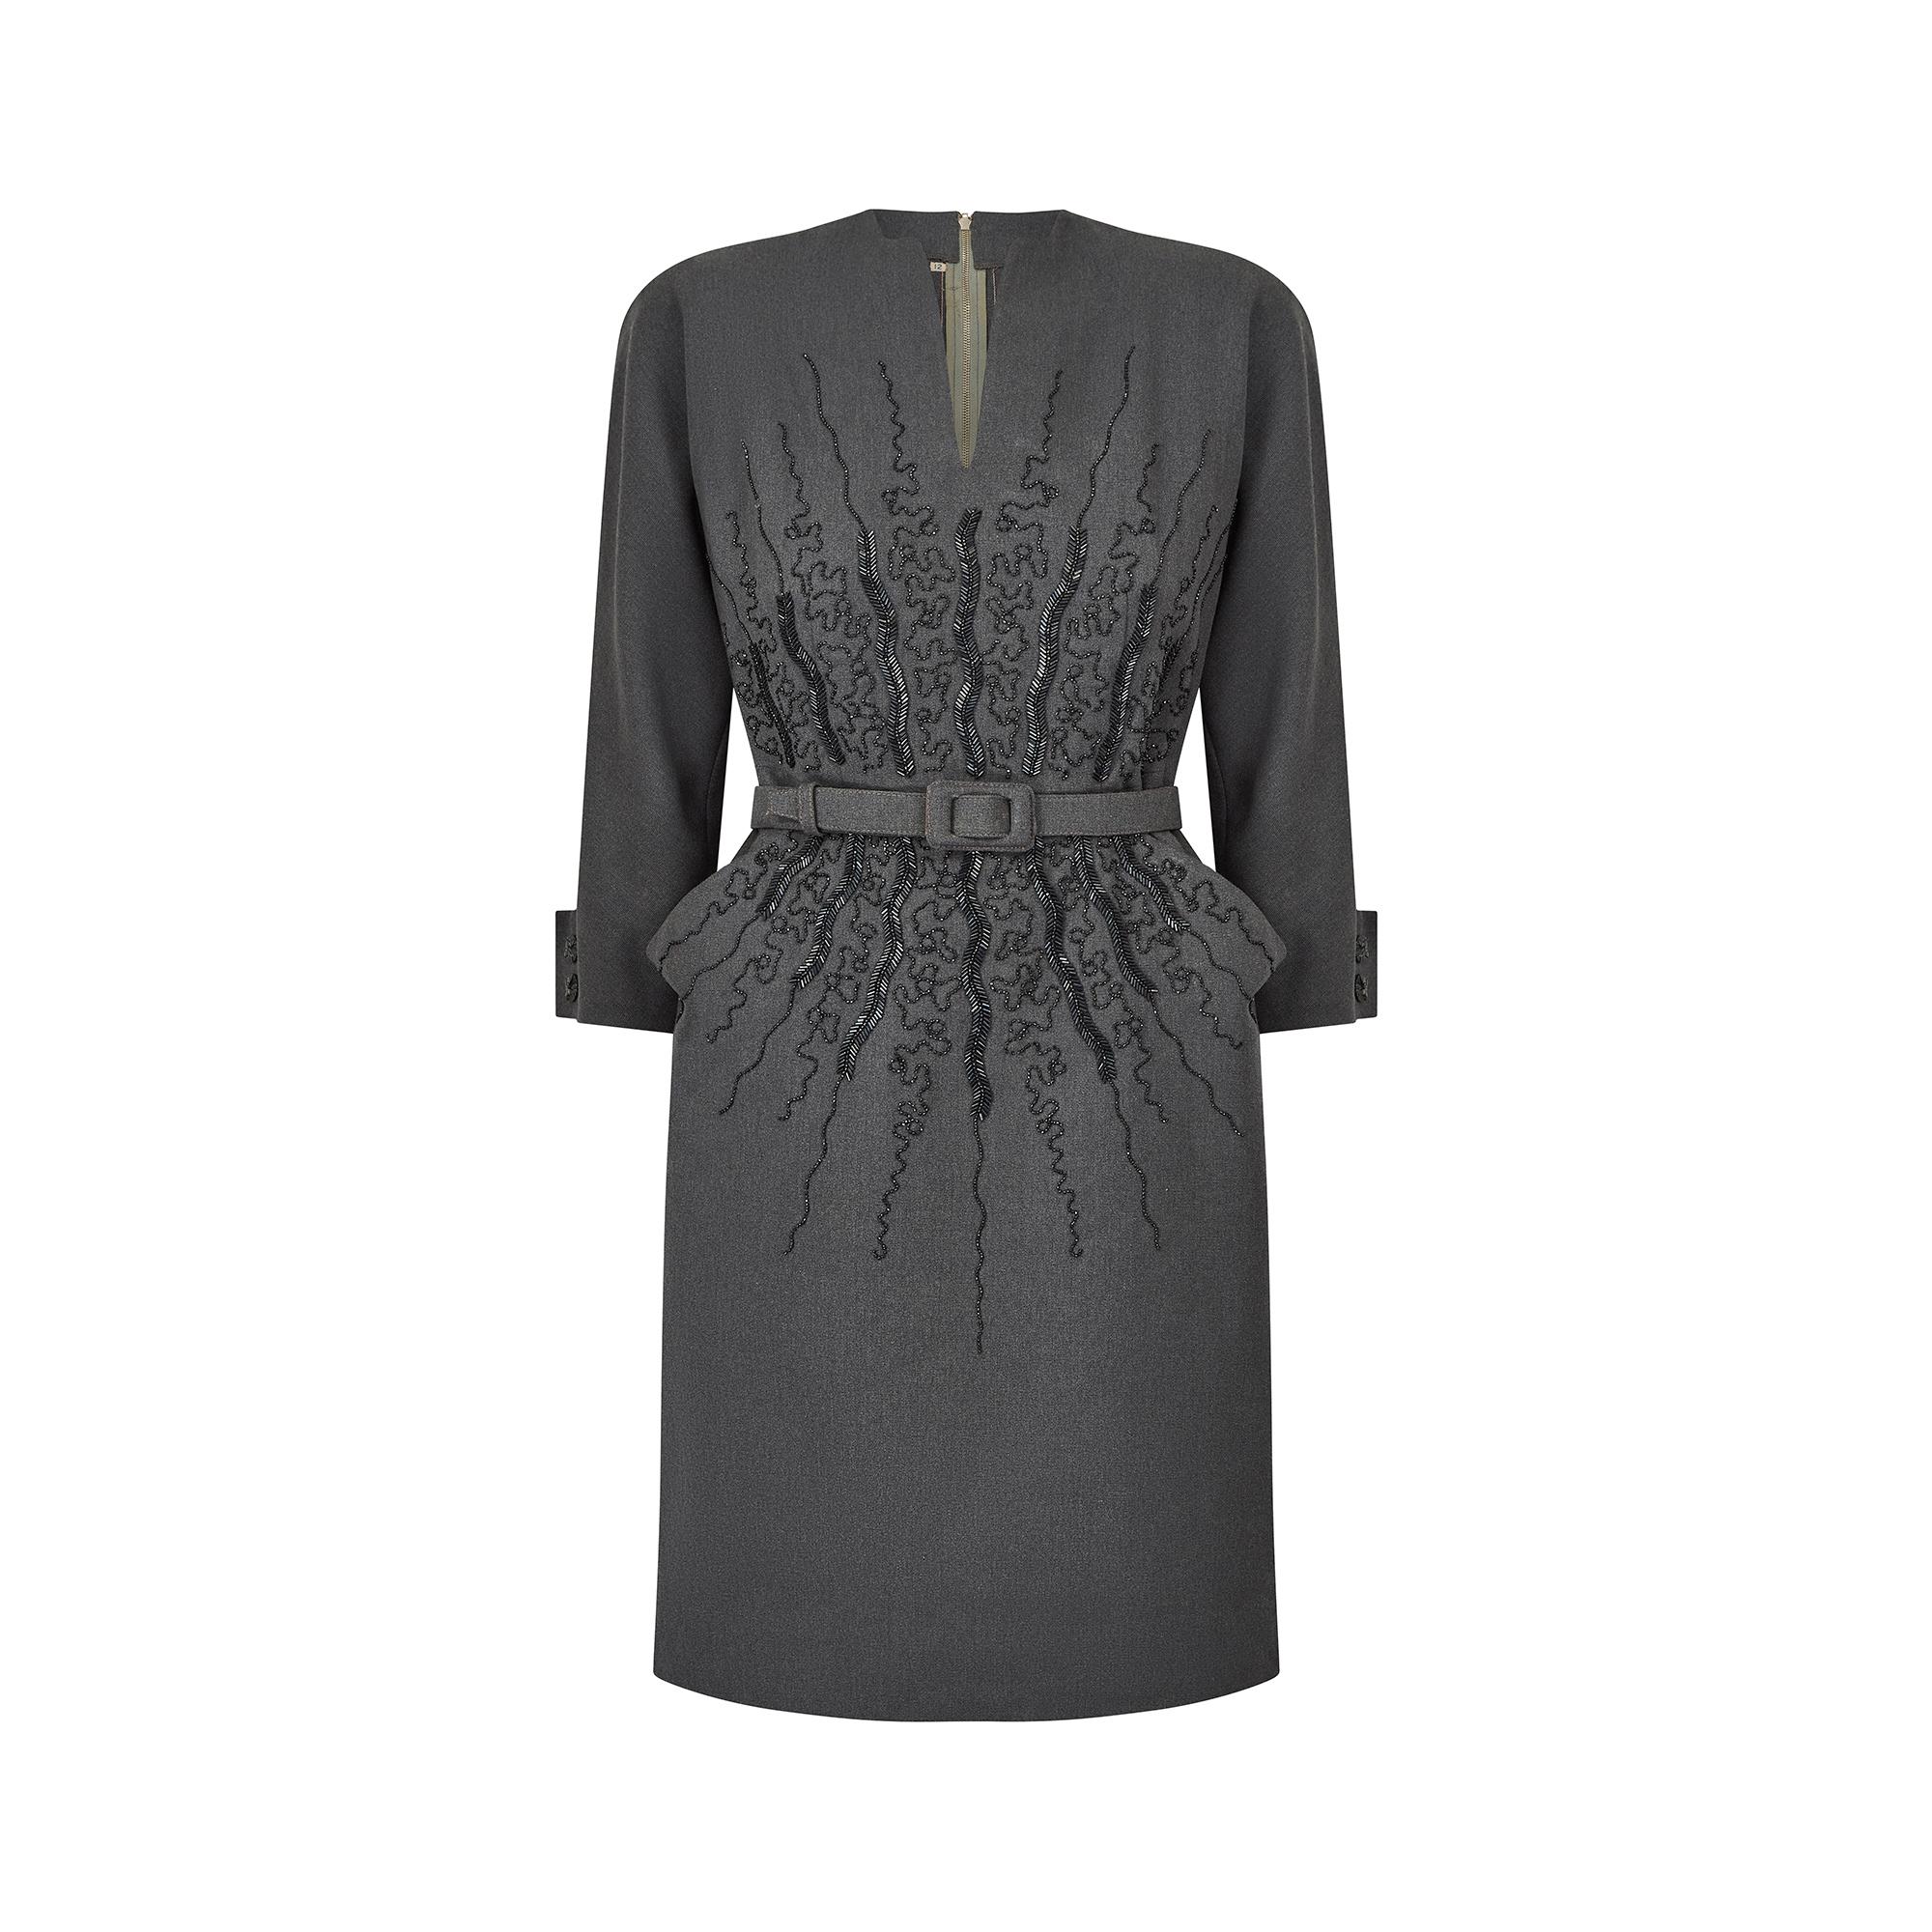 This grey wool dress dates from the very early 1950s has a lovely structured feel to it, and incredible beaded detail. The neckline is high with a small V shaped slit to the front of the bust, and the cuffs have a two button detail to each sleeve.